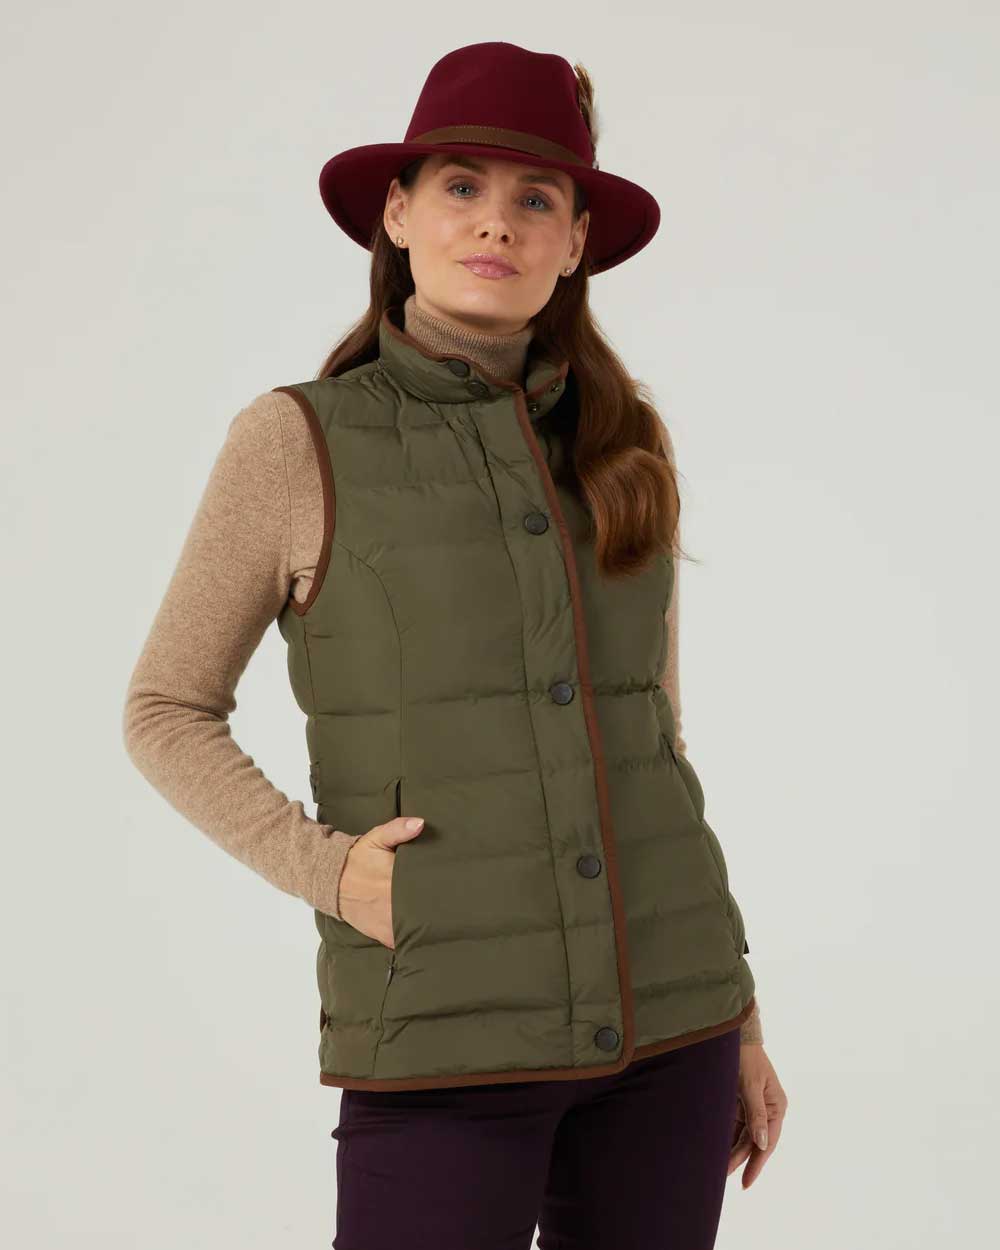 Alan Paine Calsall Ladies Gilet in Olive 